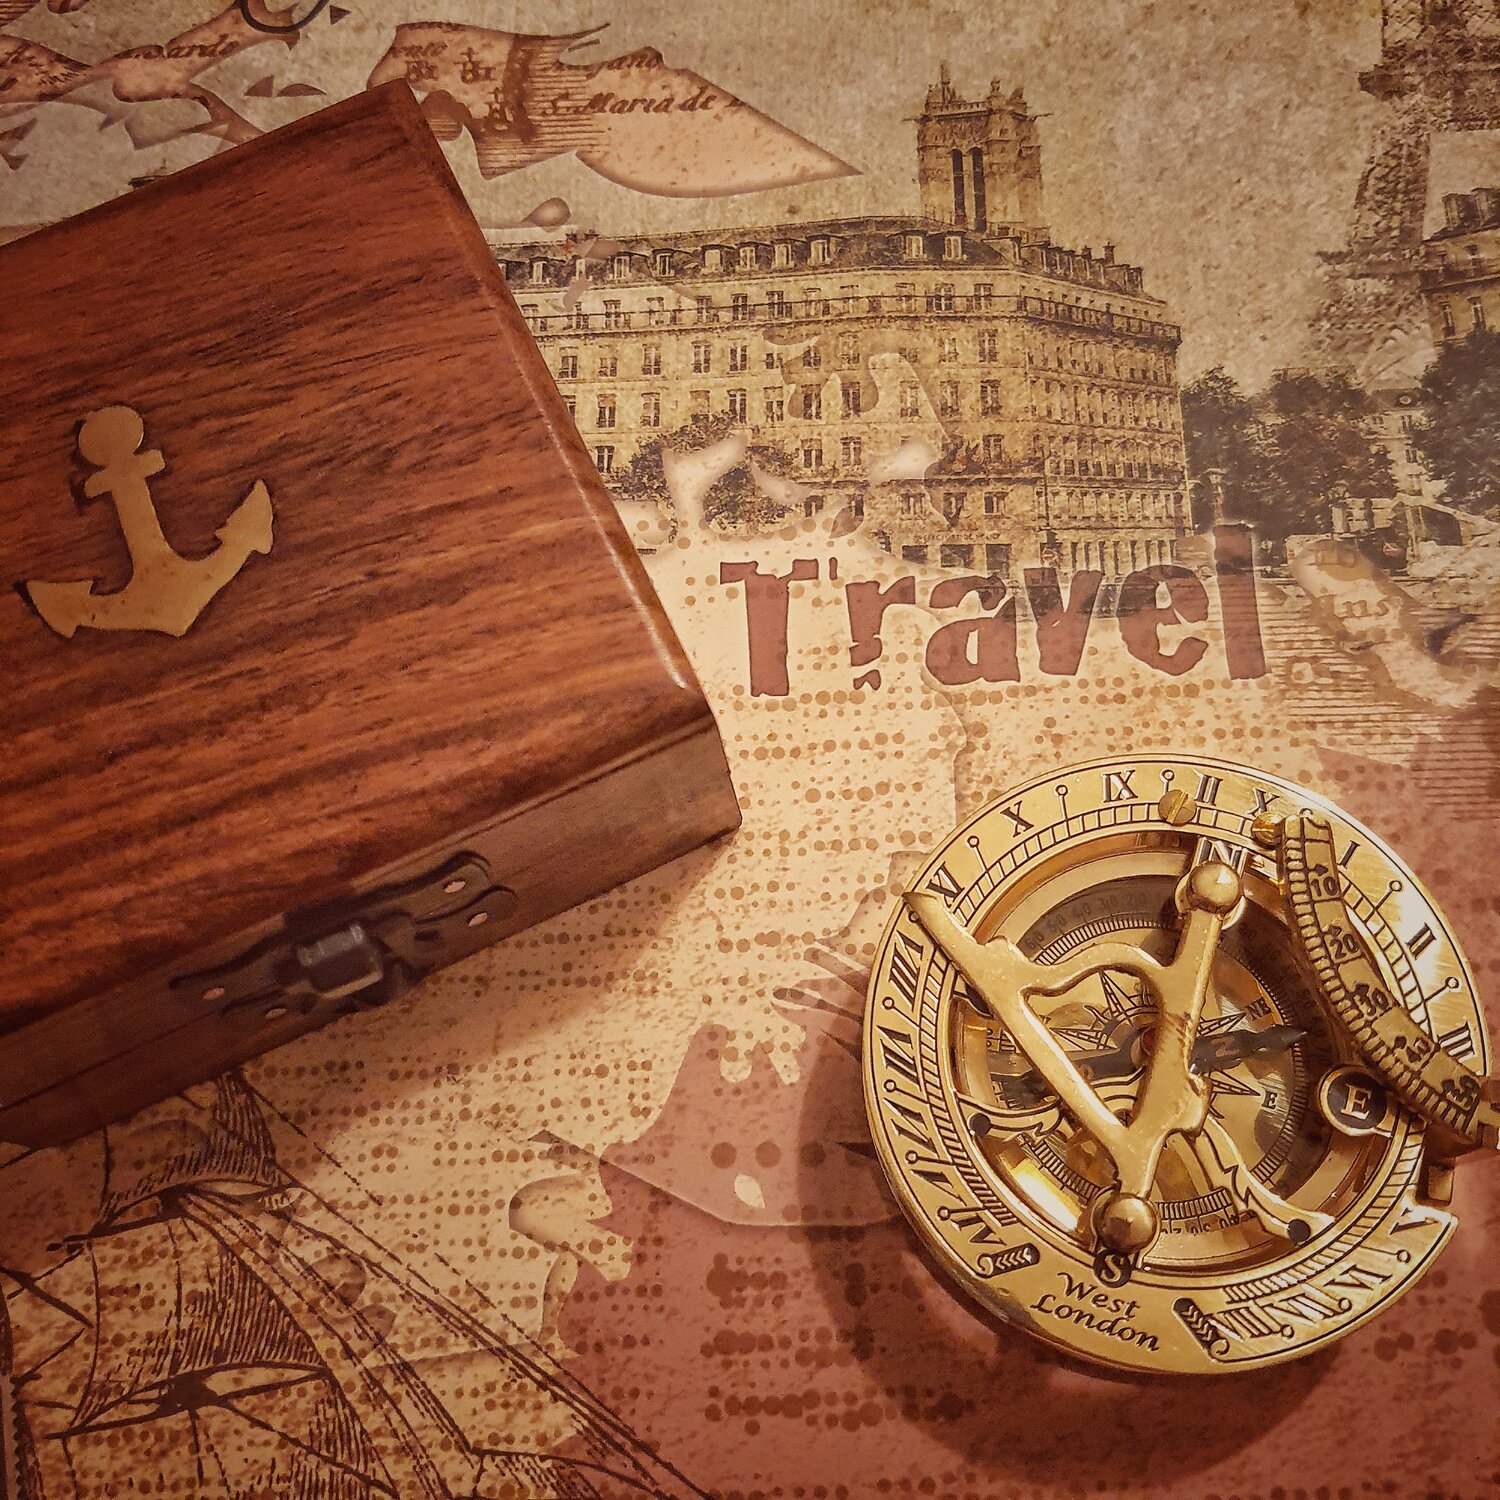 4-1/2 Antiqued Brass Sundial Compass with Wooden Box- Antique Vintage  Style - Schooner Bay Company